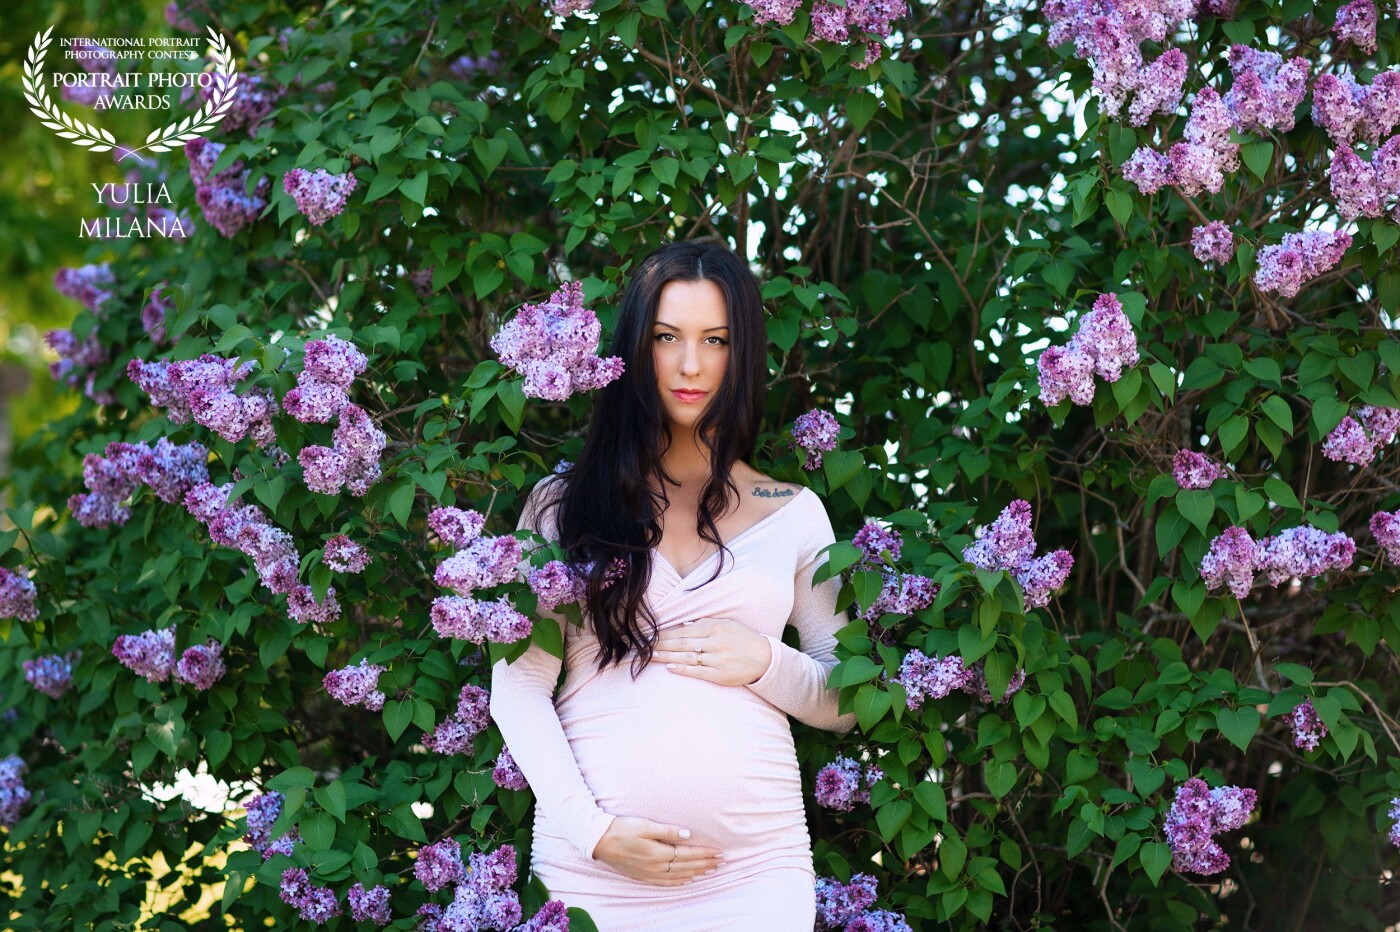 A first maternity shoot I ever did and beautiful Allie made this so easy for me! After our Apple blossom shoot, I saw this beautiful lilac tree and knew we have to stop by for few photos and I am so happy we did. This is my favorite from that whole shoot! Thank you for selecting it :)